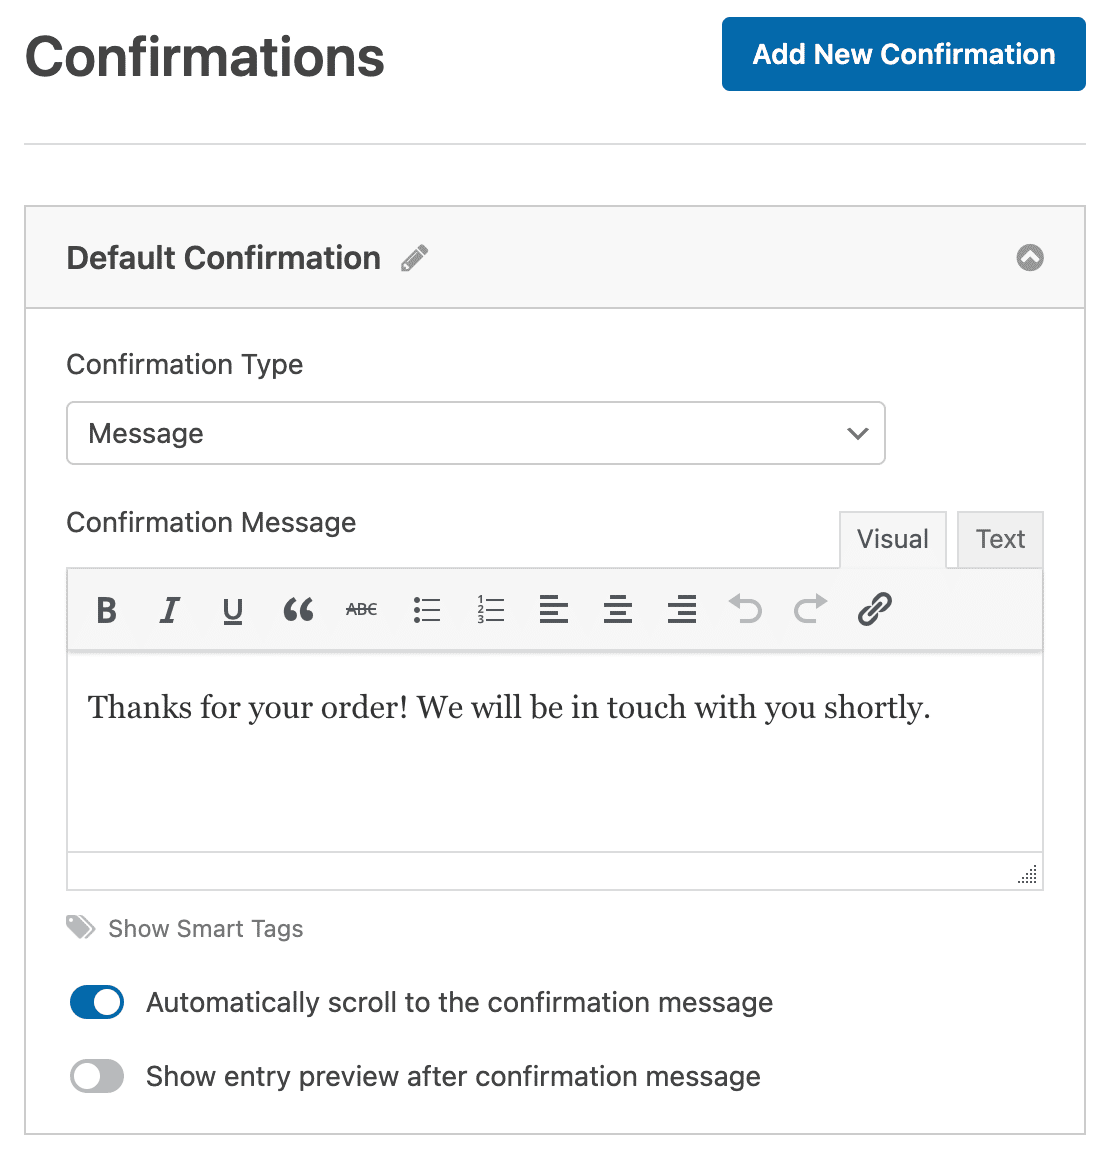 Customizing the confirmation message for an Avon order form